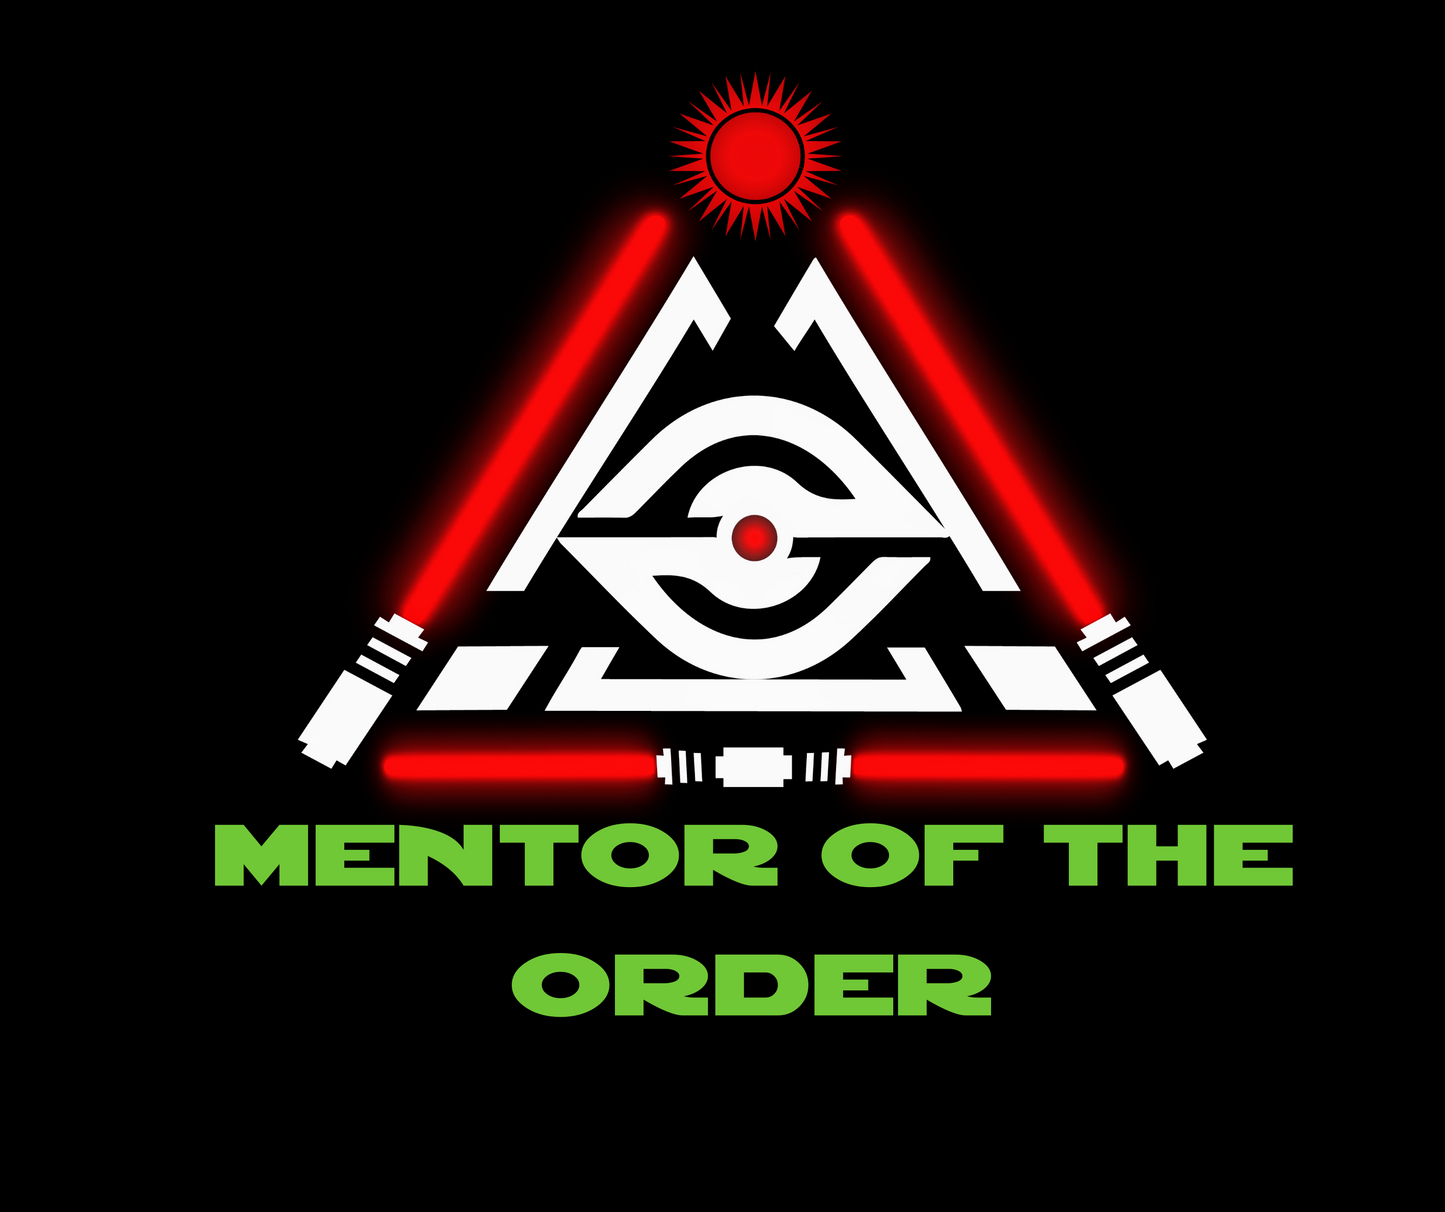 Mentor of the Order